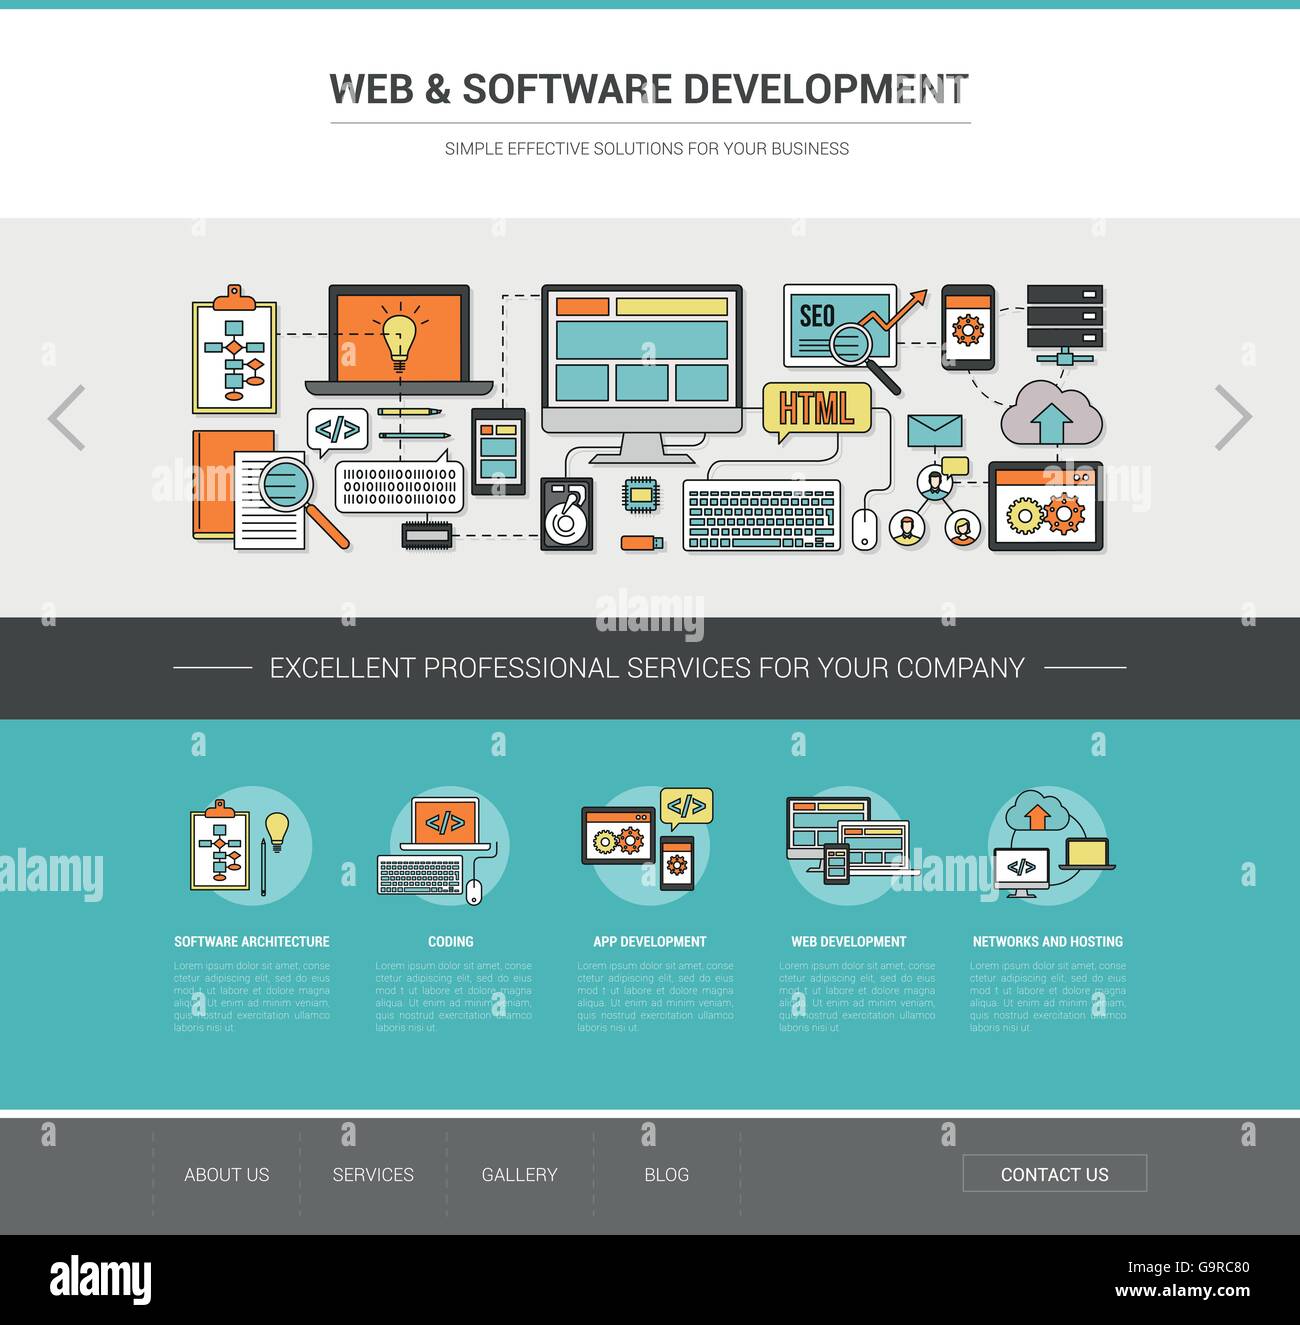 Web and software development template, coding, social network and hosting concept Stock Vector